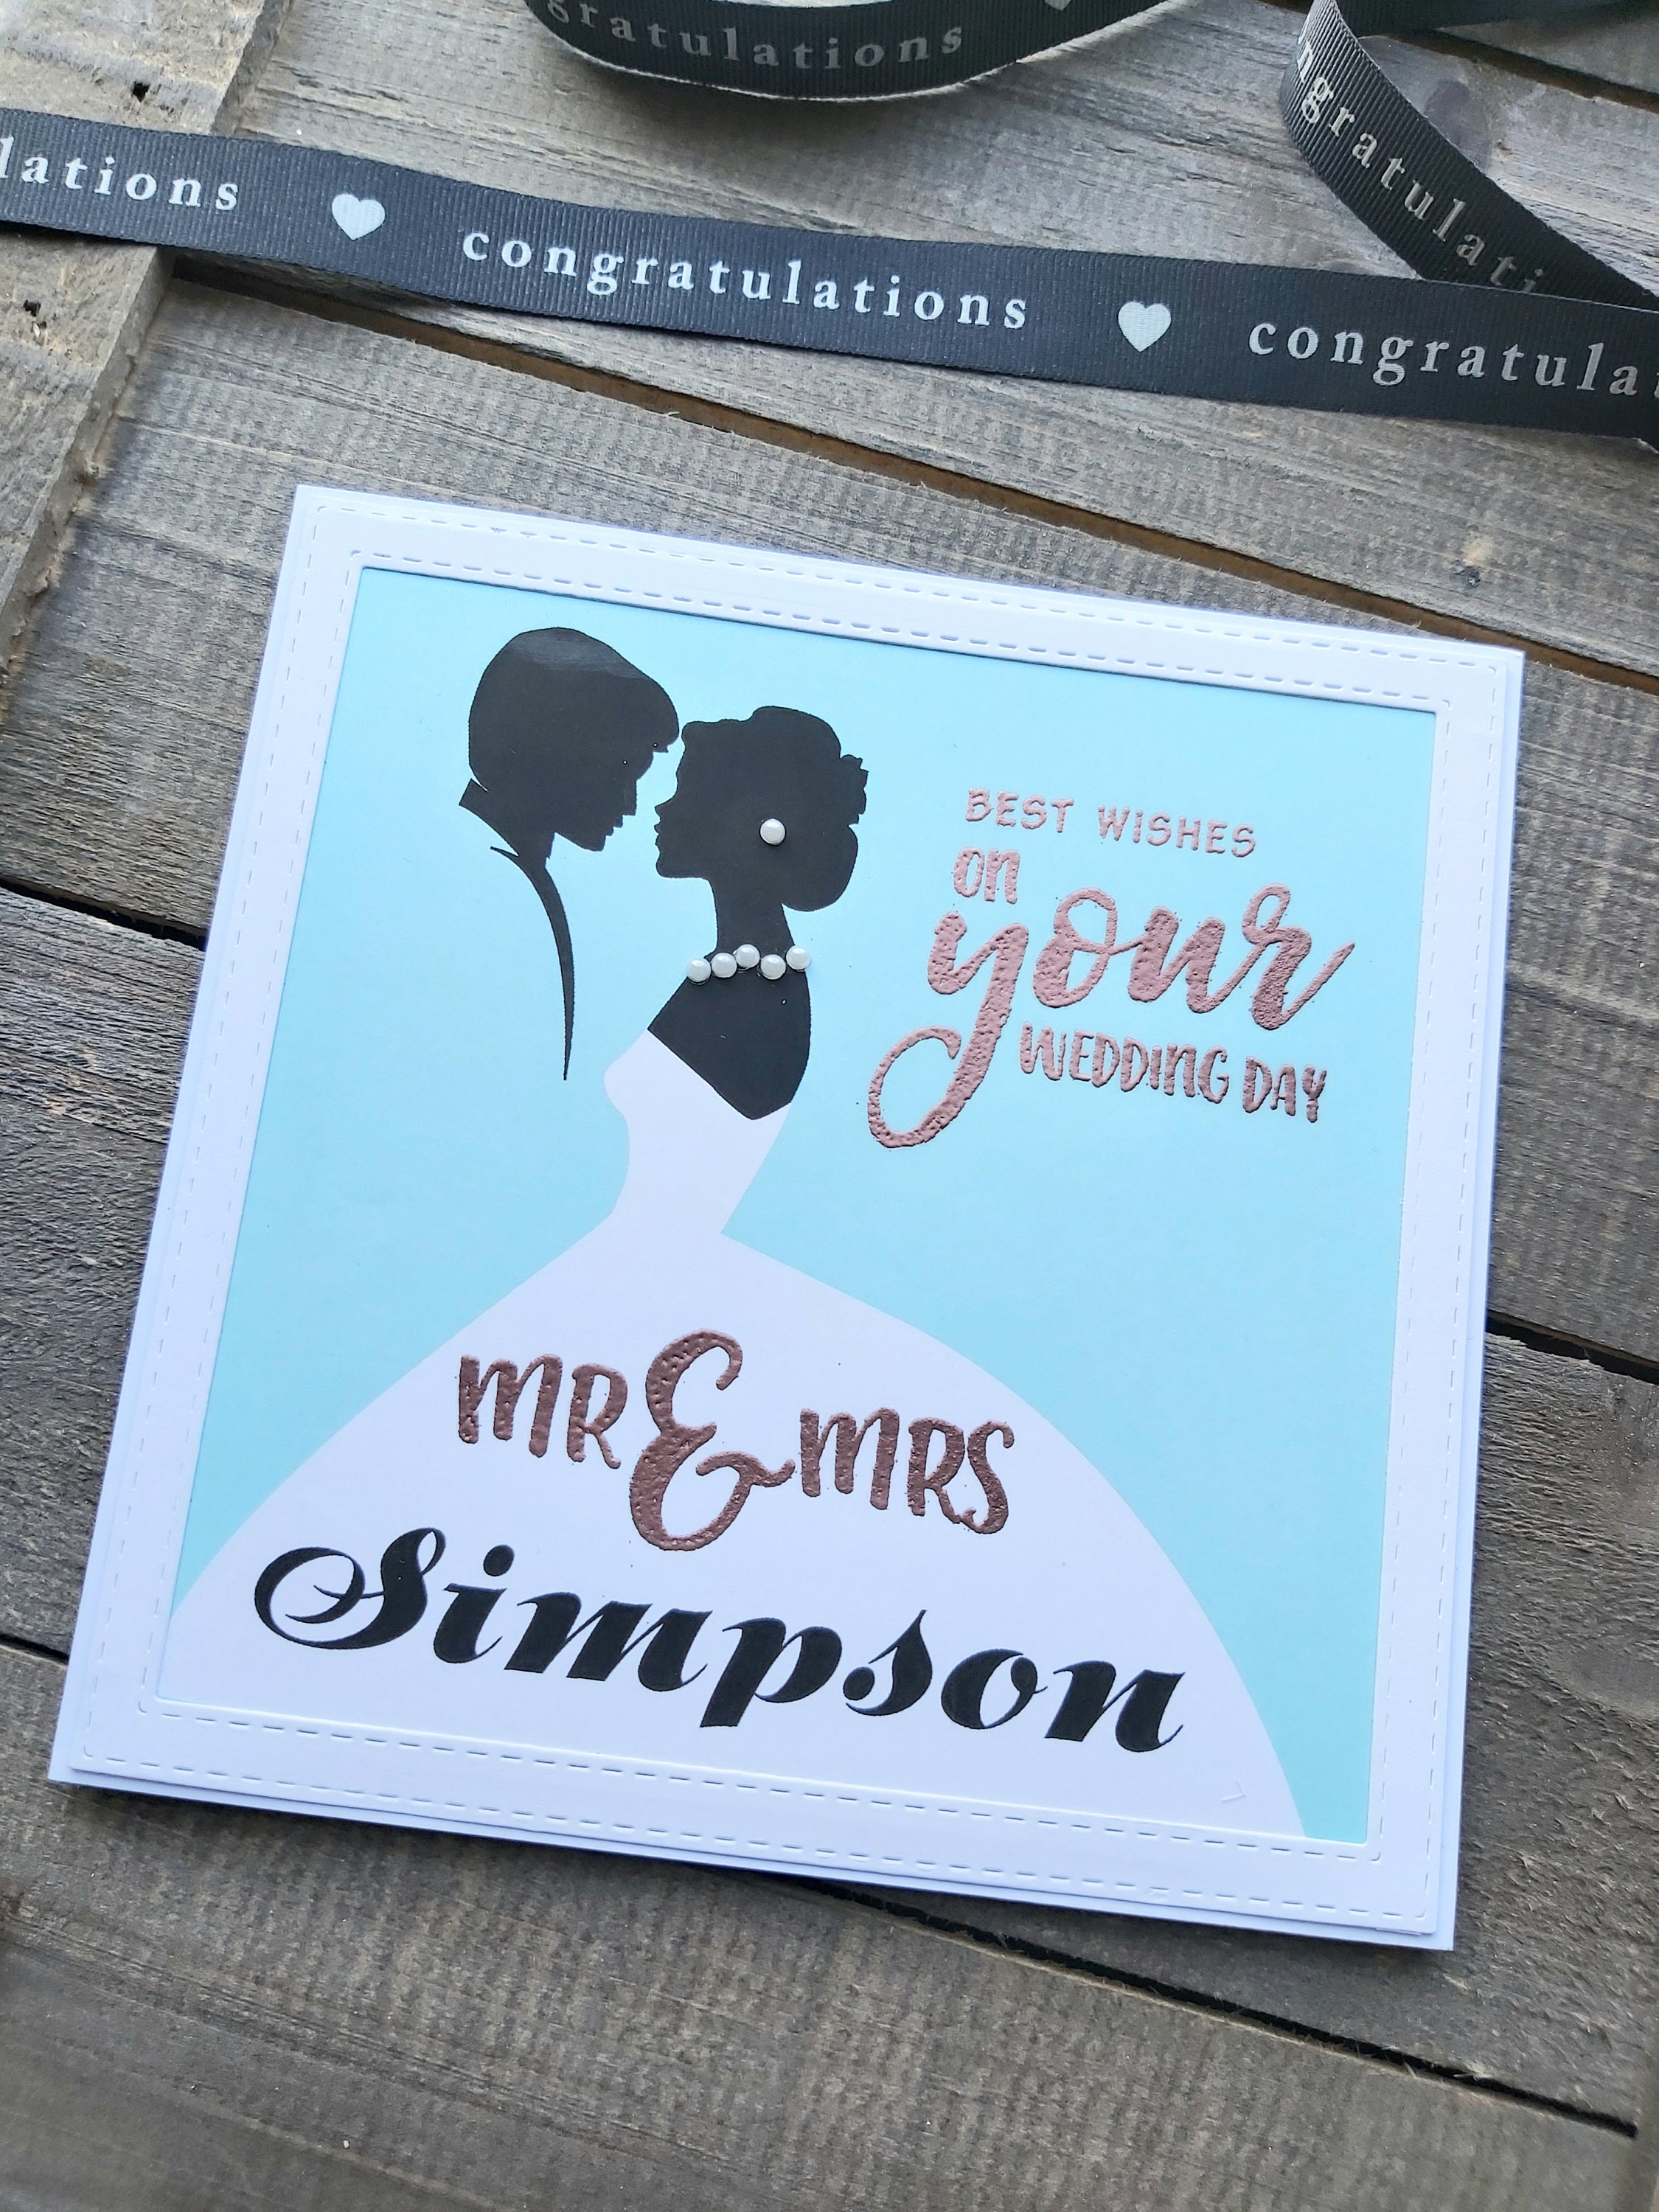 Special day wedding card Mrs and Mrs wedding day card Card for couple